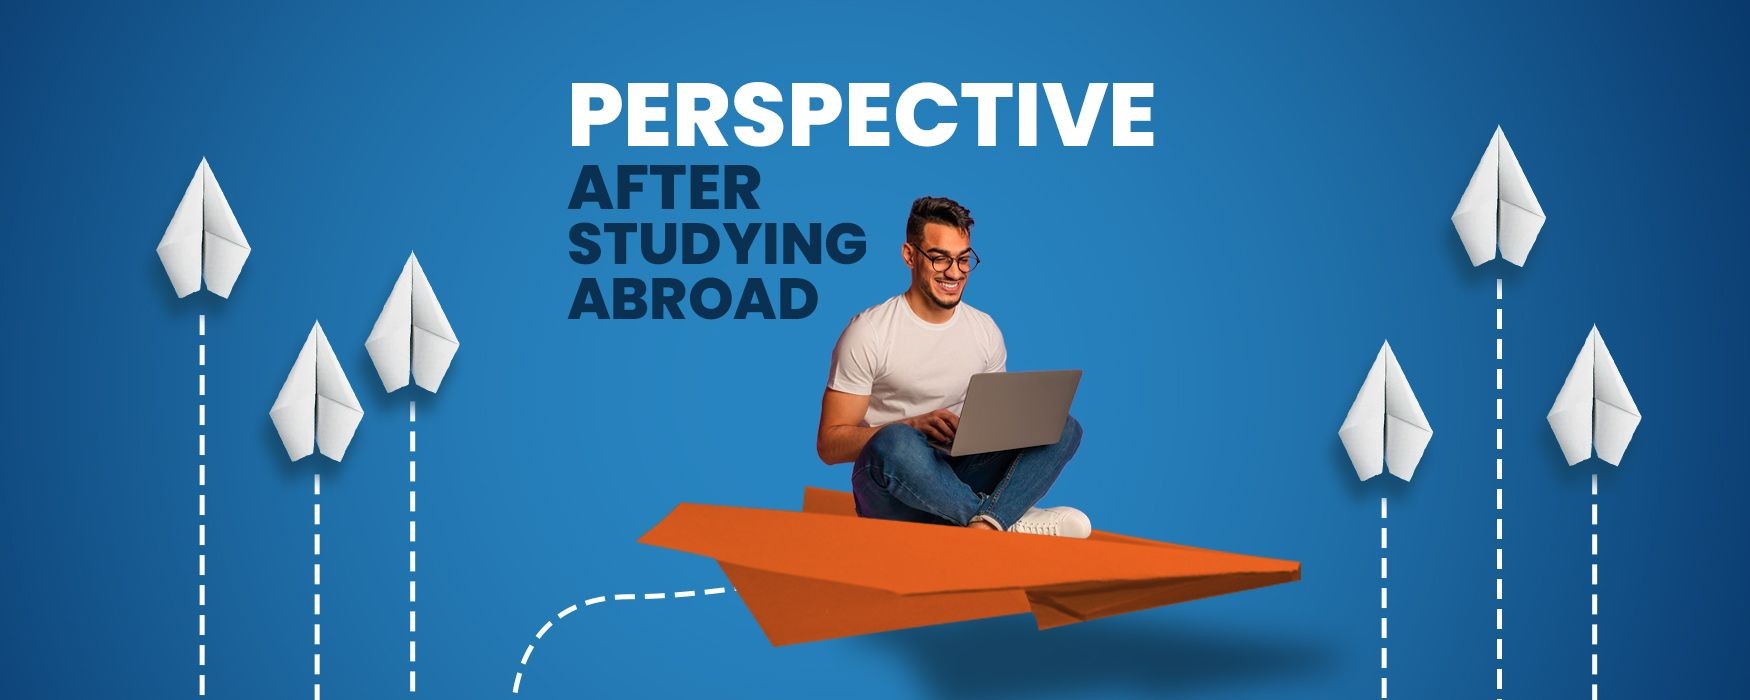 How-9-Things-Will-Change-The-Way-You-Approach-After-Studying-Abroad.jpg